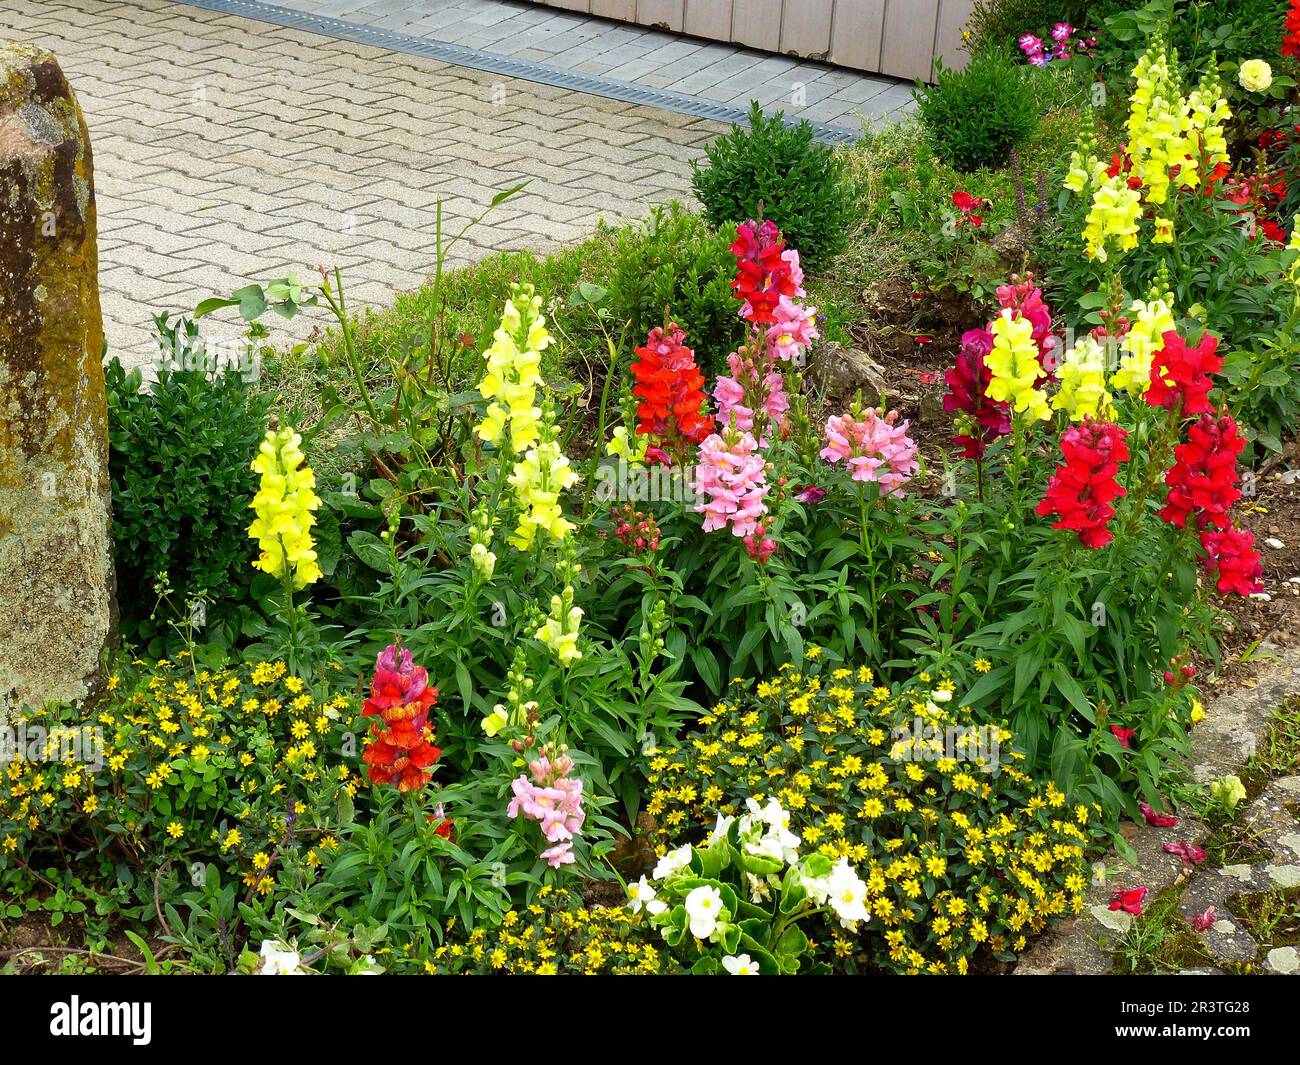 Snapdragon flowering in the front garden, common snapdragon (Antirrhinum majus) Garden Snapdragon Stock Photo